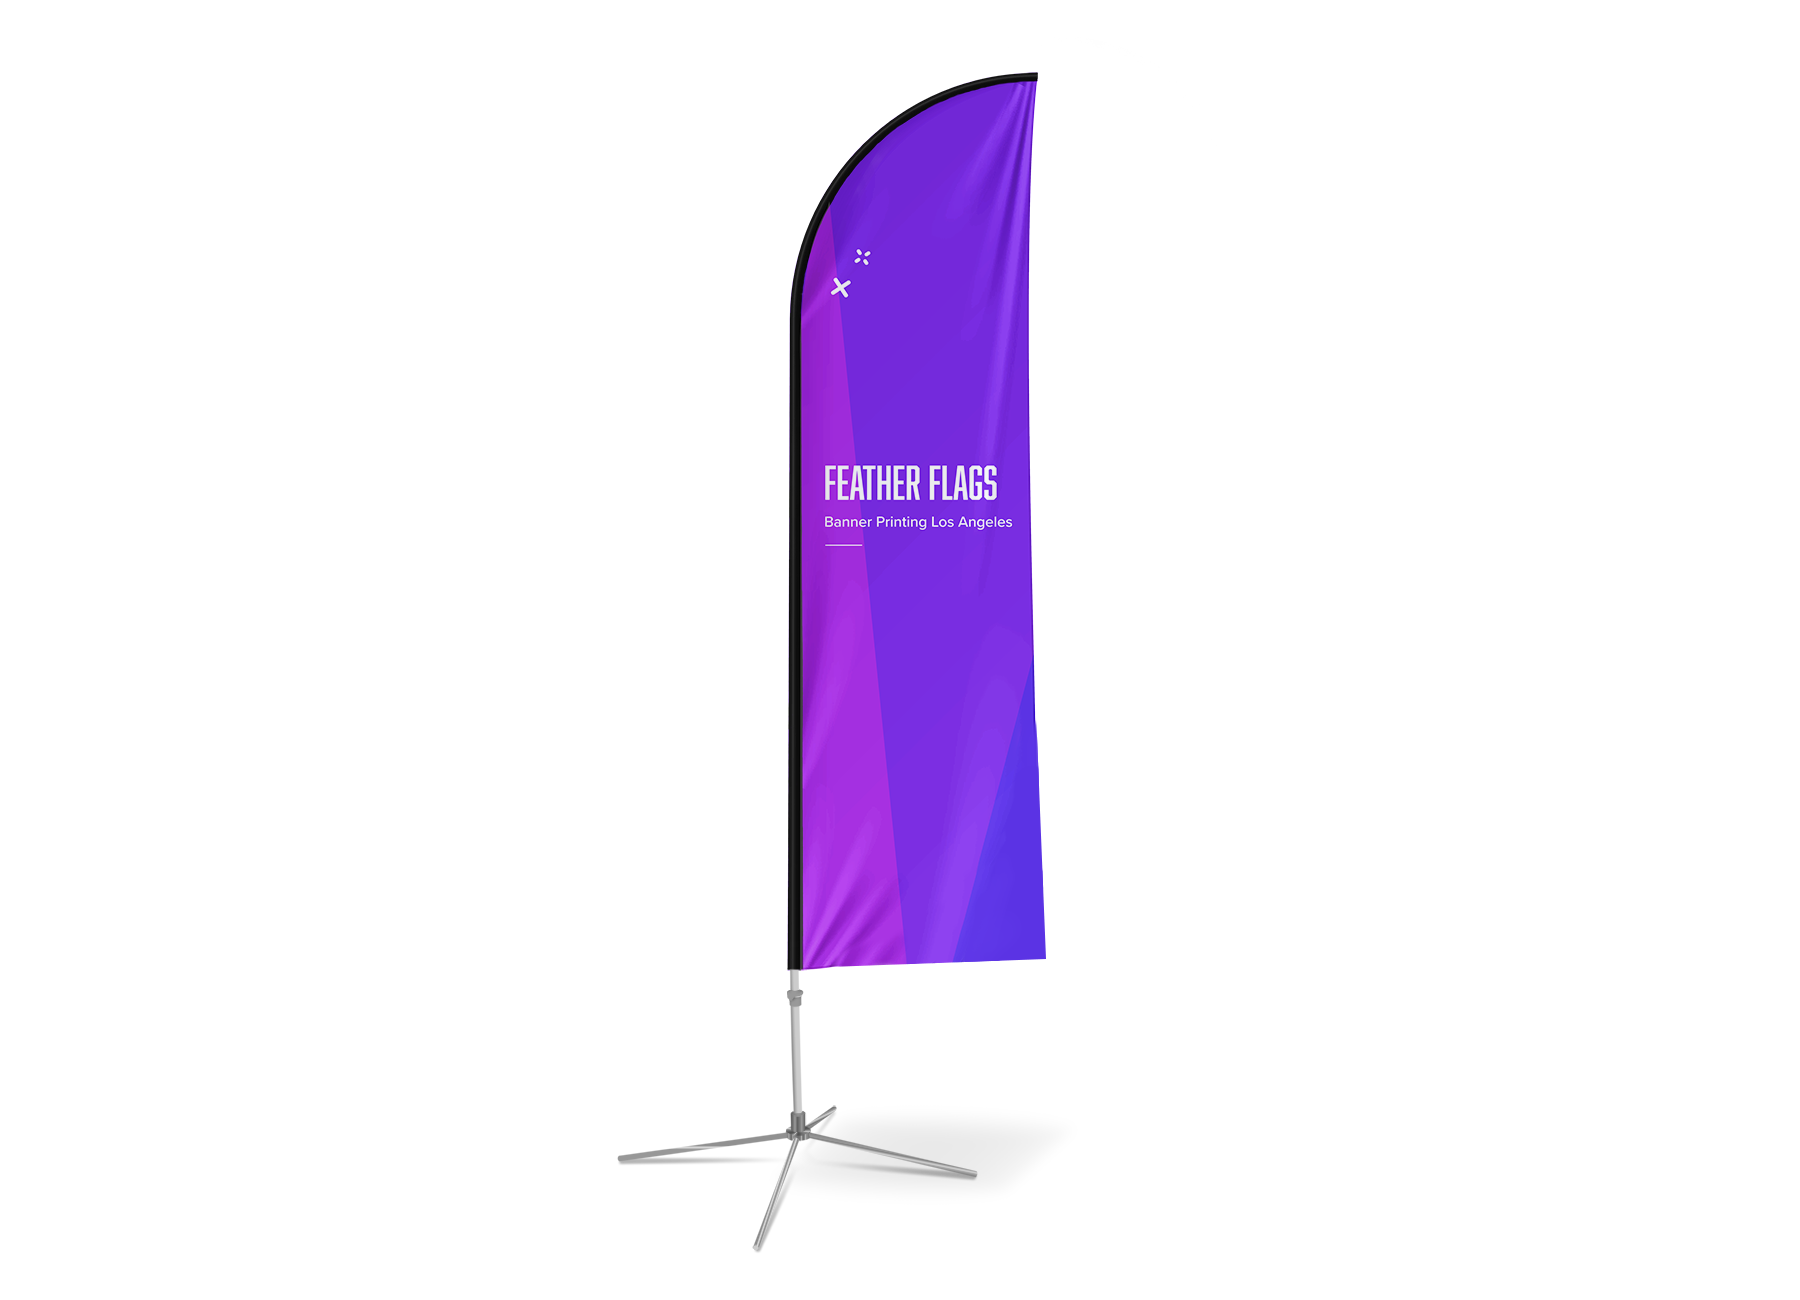 Los Angeles Feather Flags printing – best price